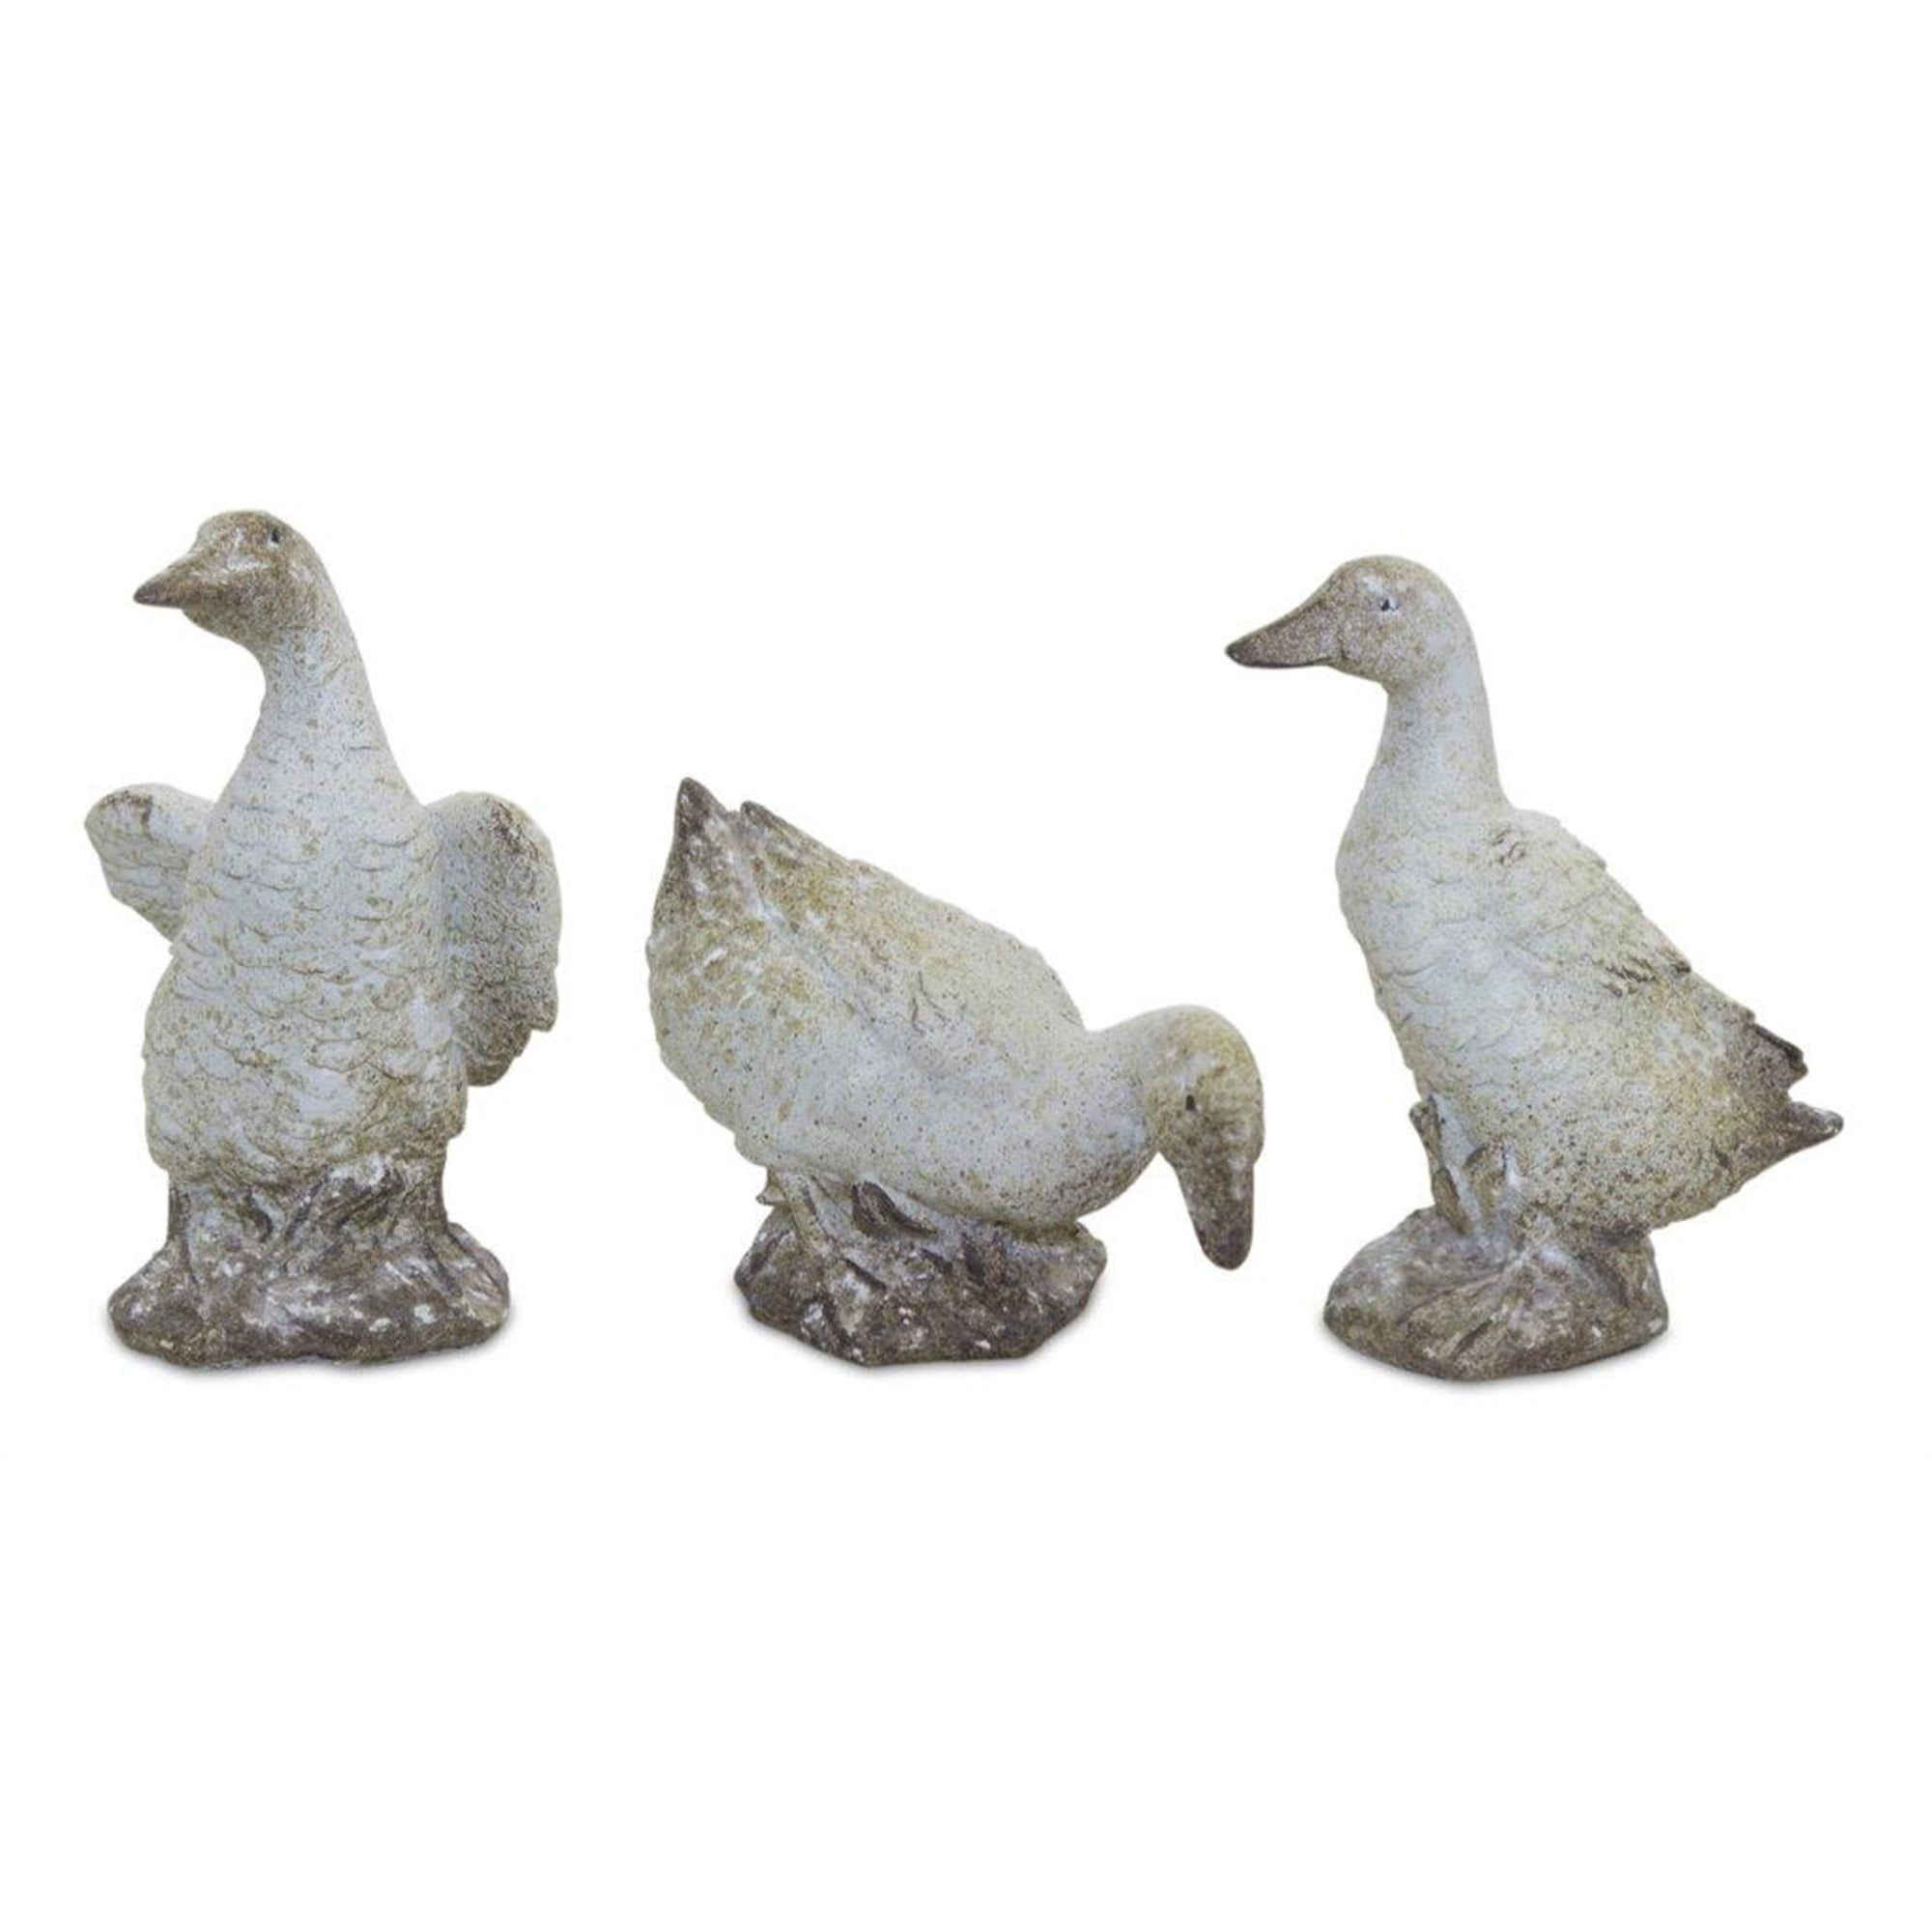 Duck (Set of 3) 2.5"H, 2.5"H, 3"H Resin